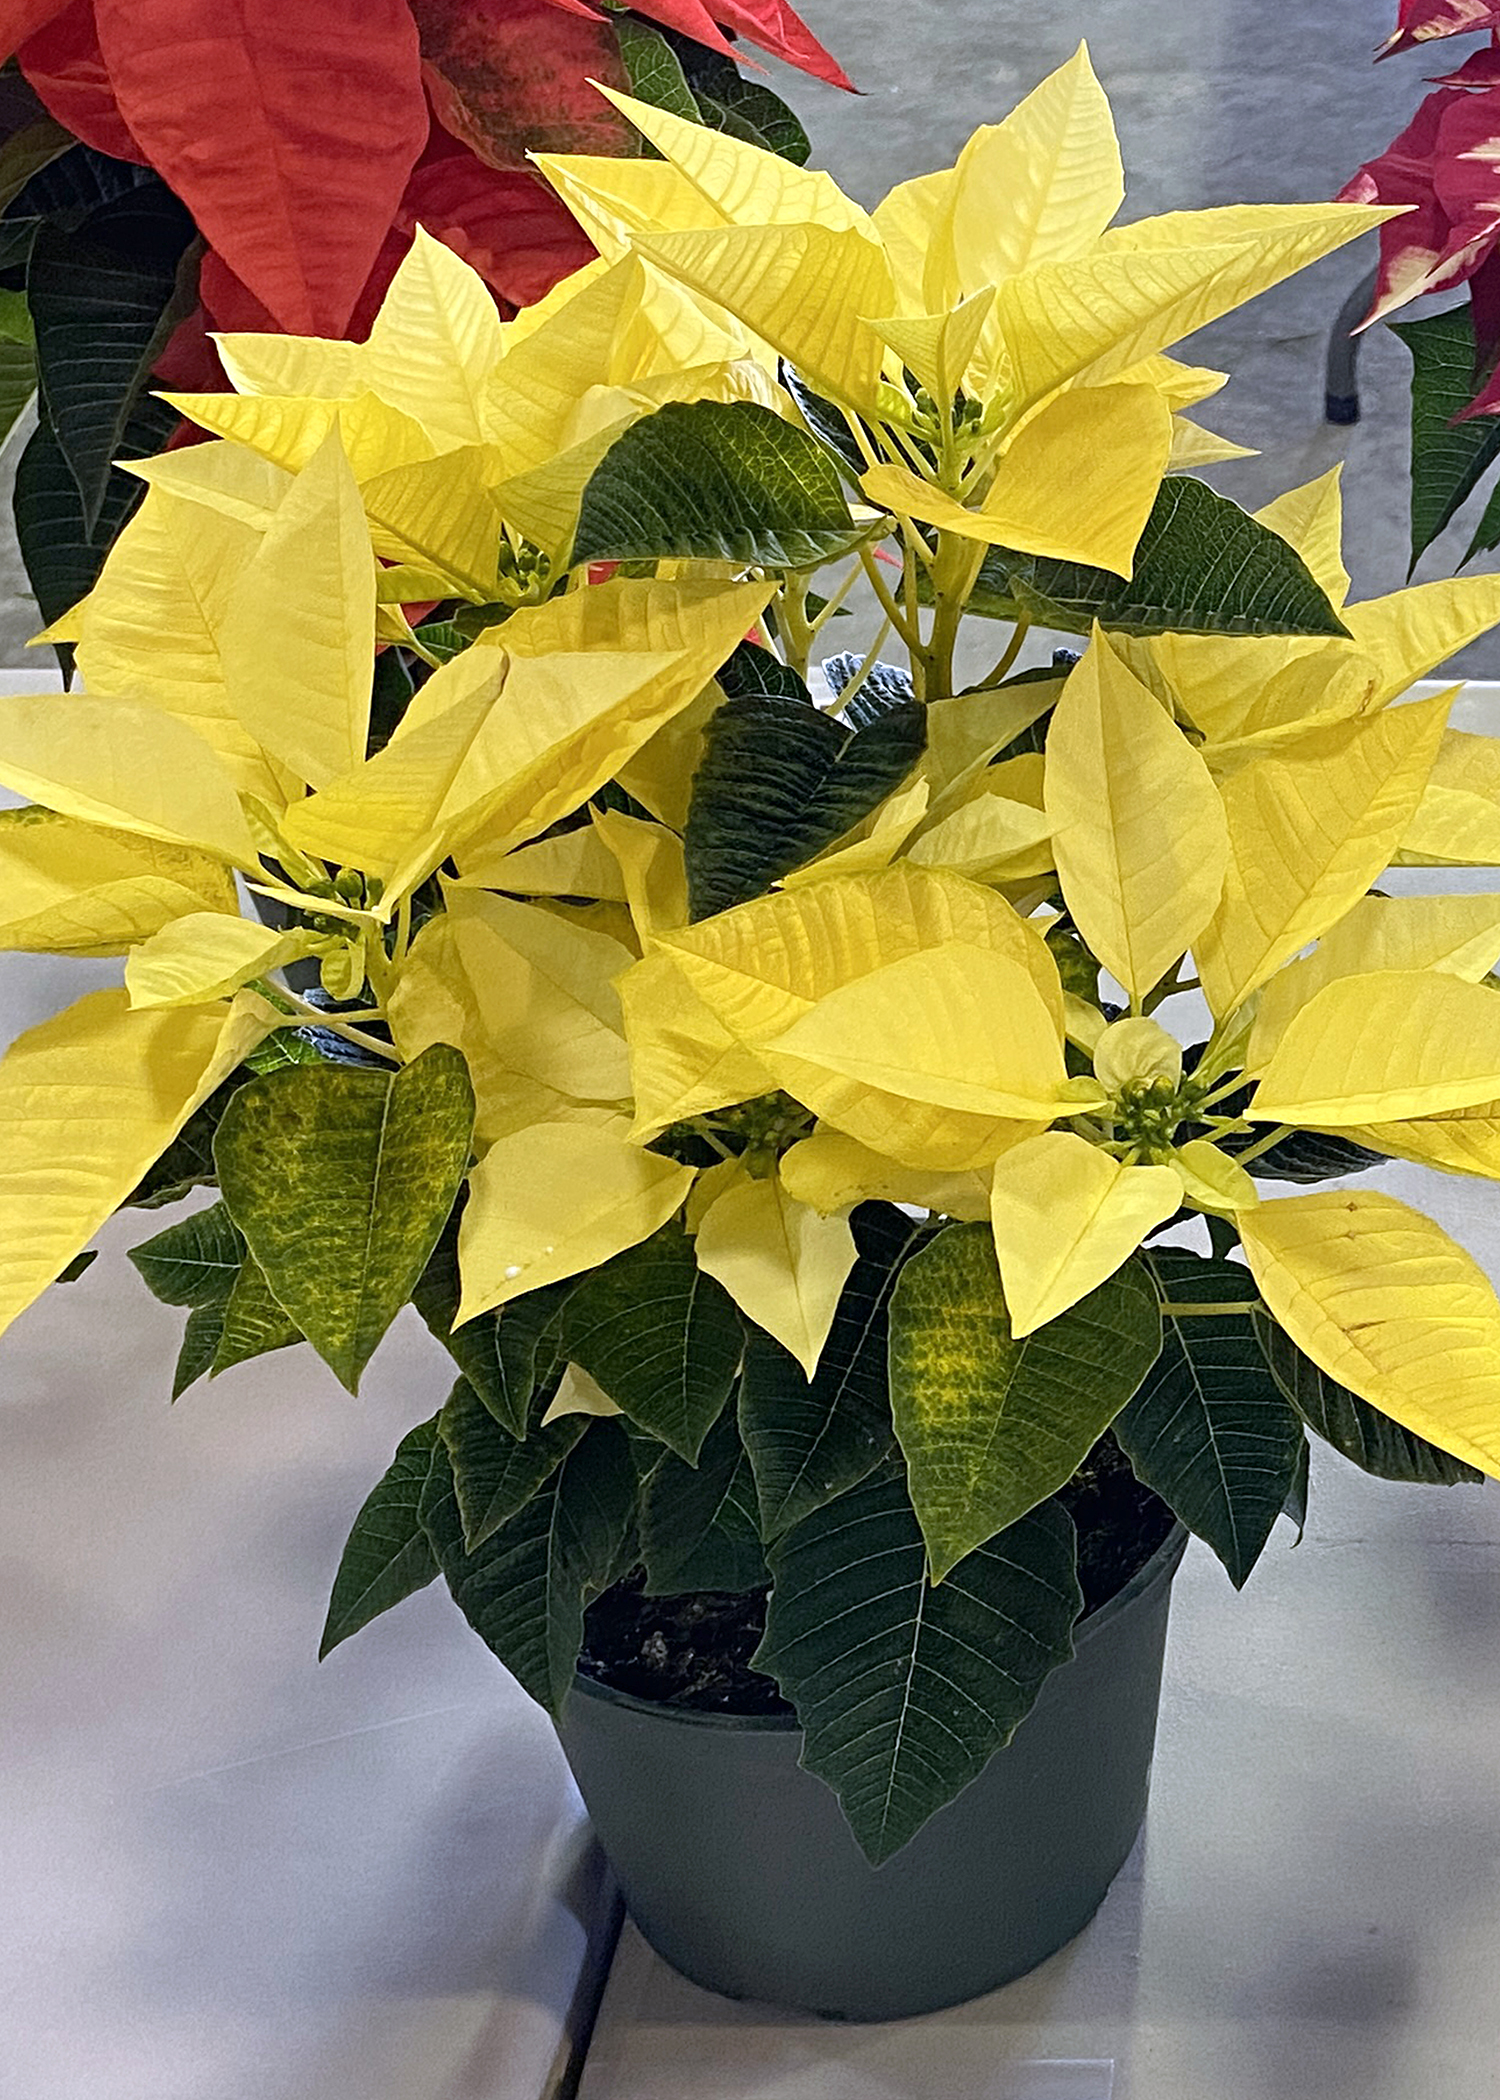 Wide-ranging poinsettia colors can match holiday decorations